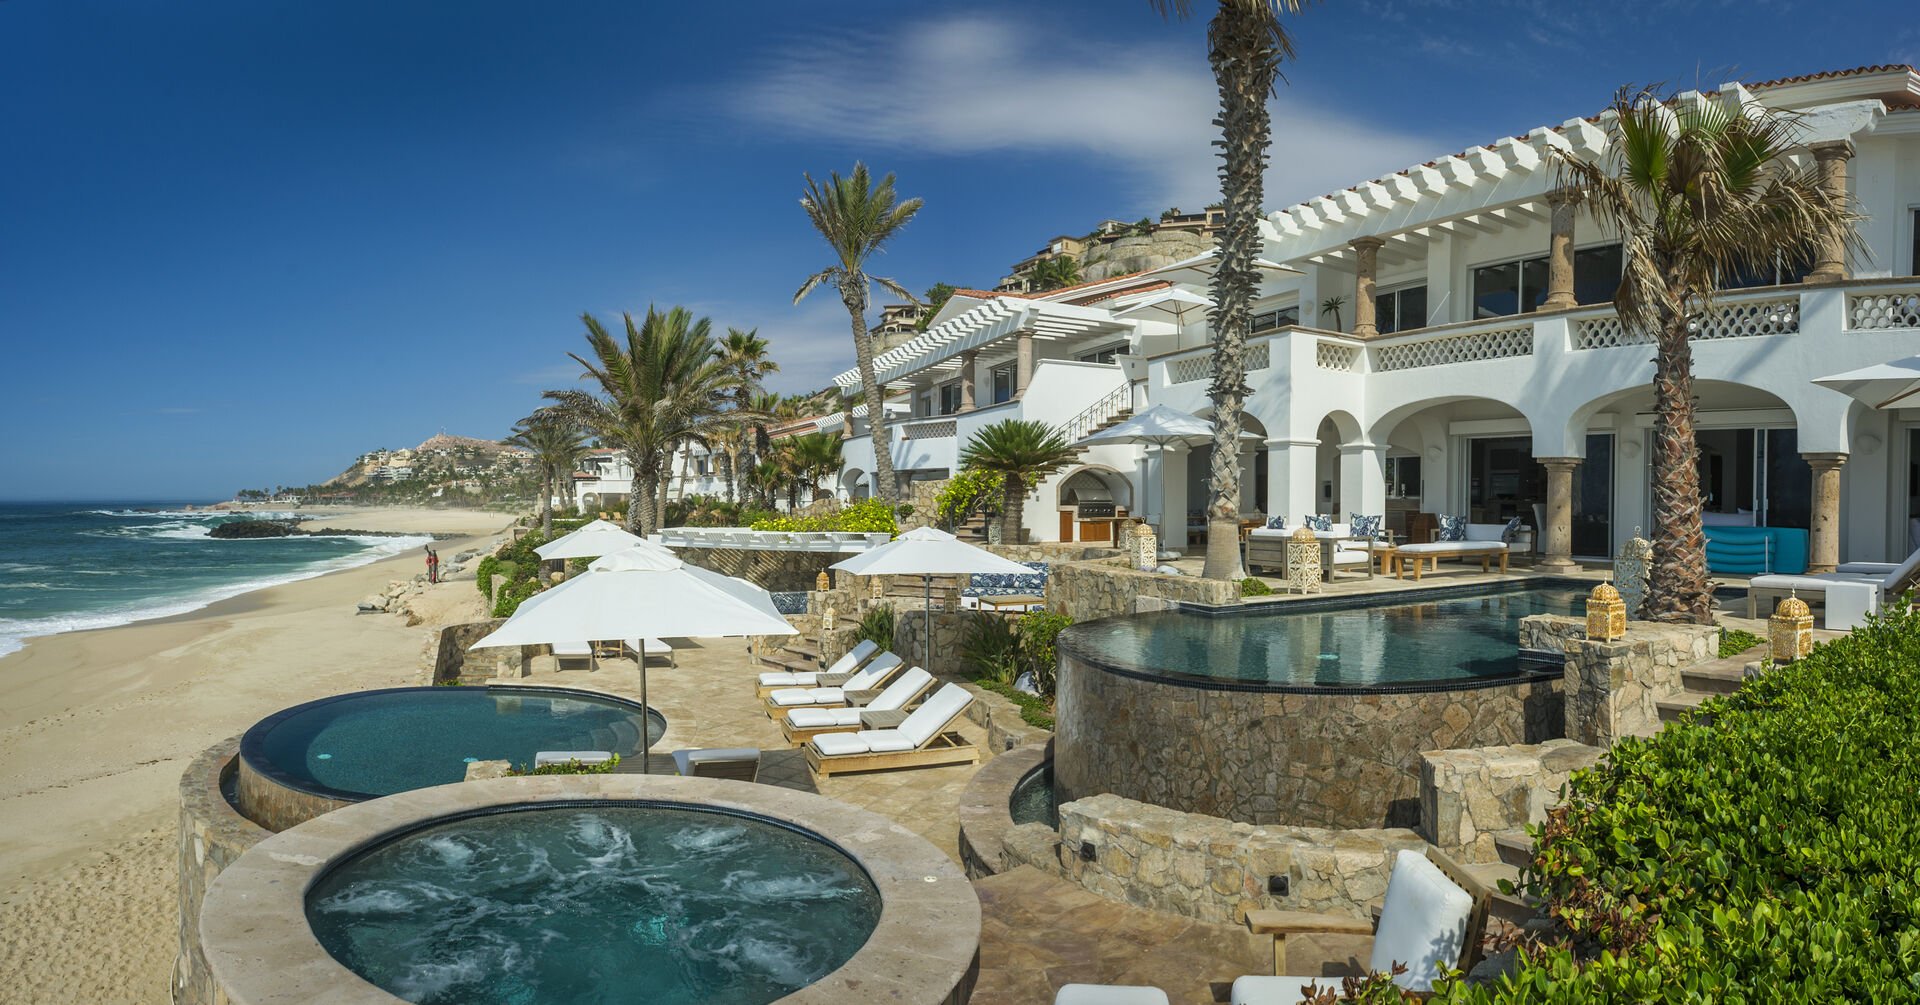 Our Los Cabos villa with a pool and a jacuzzi